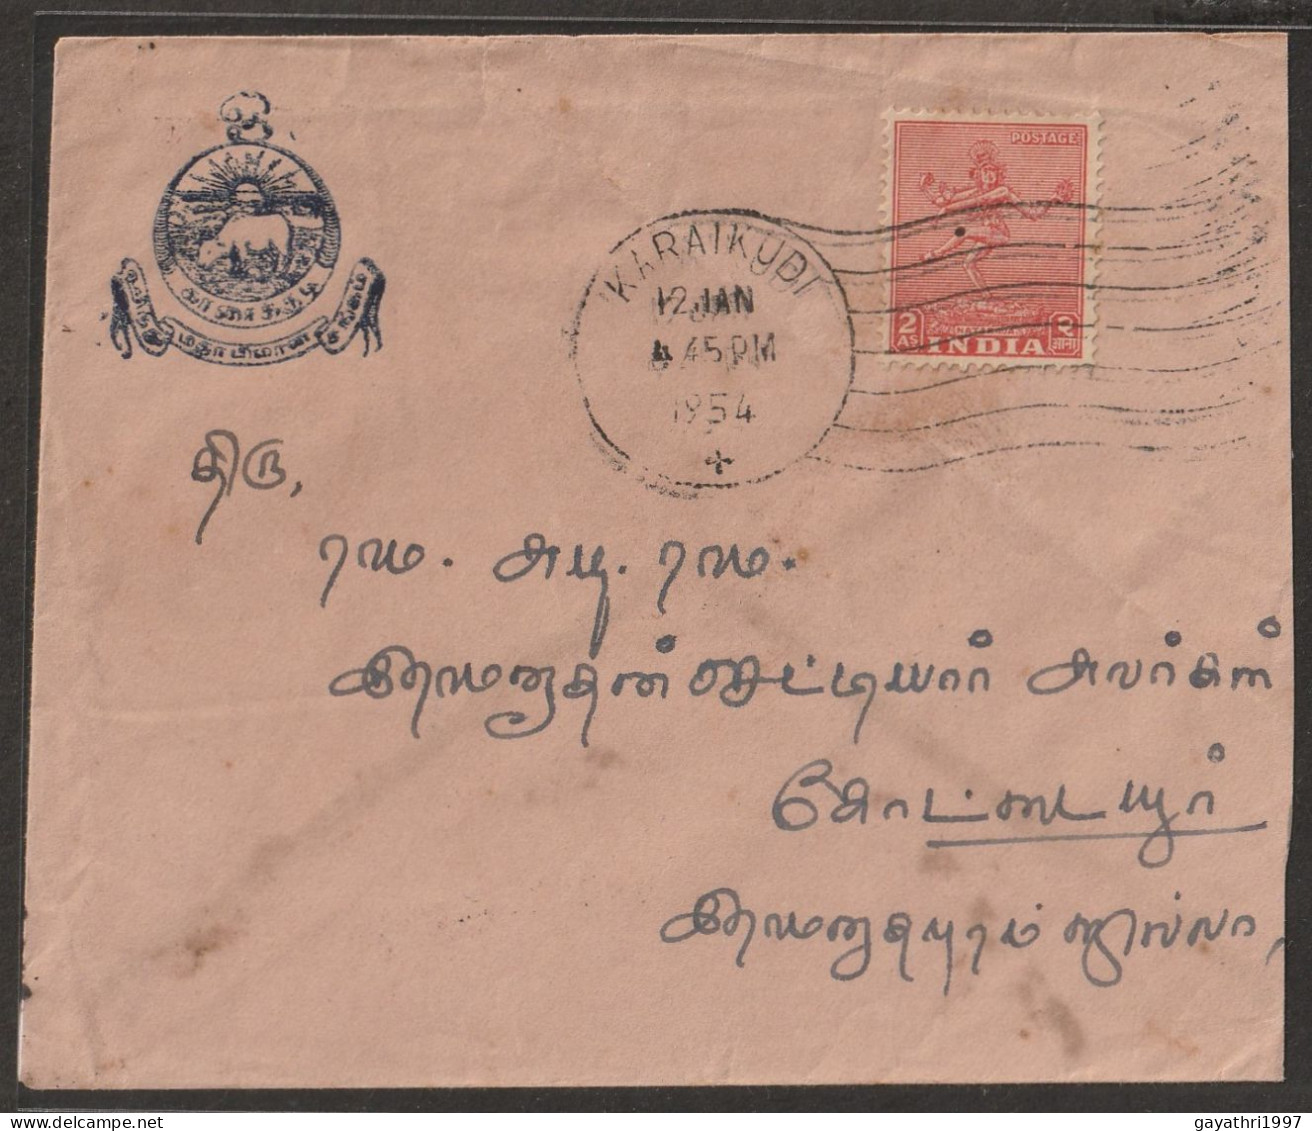 India 1954 Nataraja Stamp On Cover From Hindu Mathabane Sanga With Machine Cancellation To Party's(a184) - Hinduism